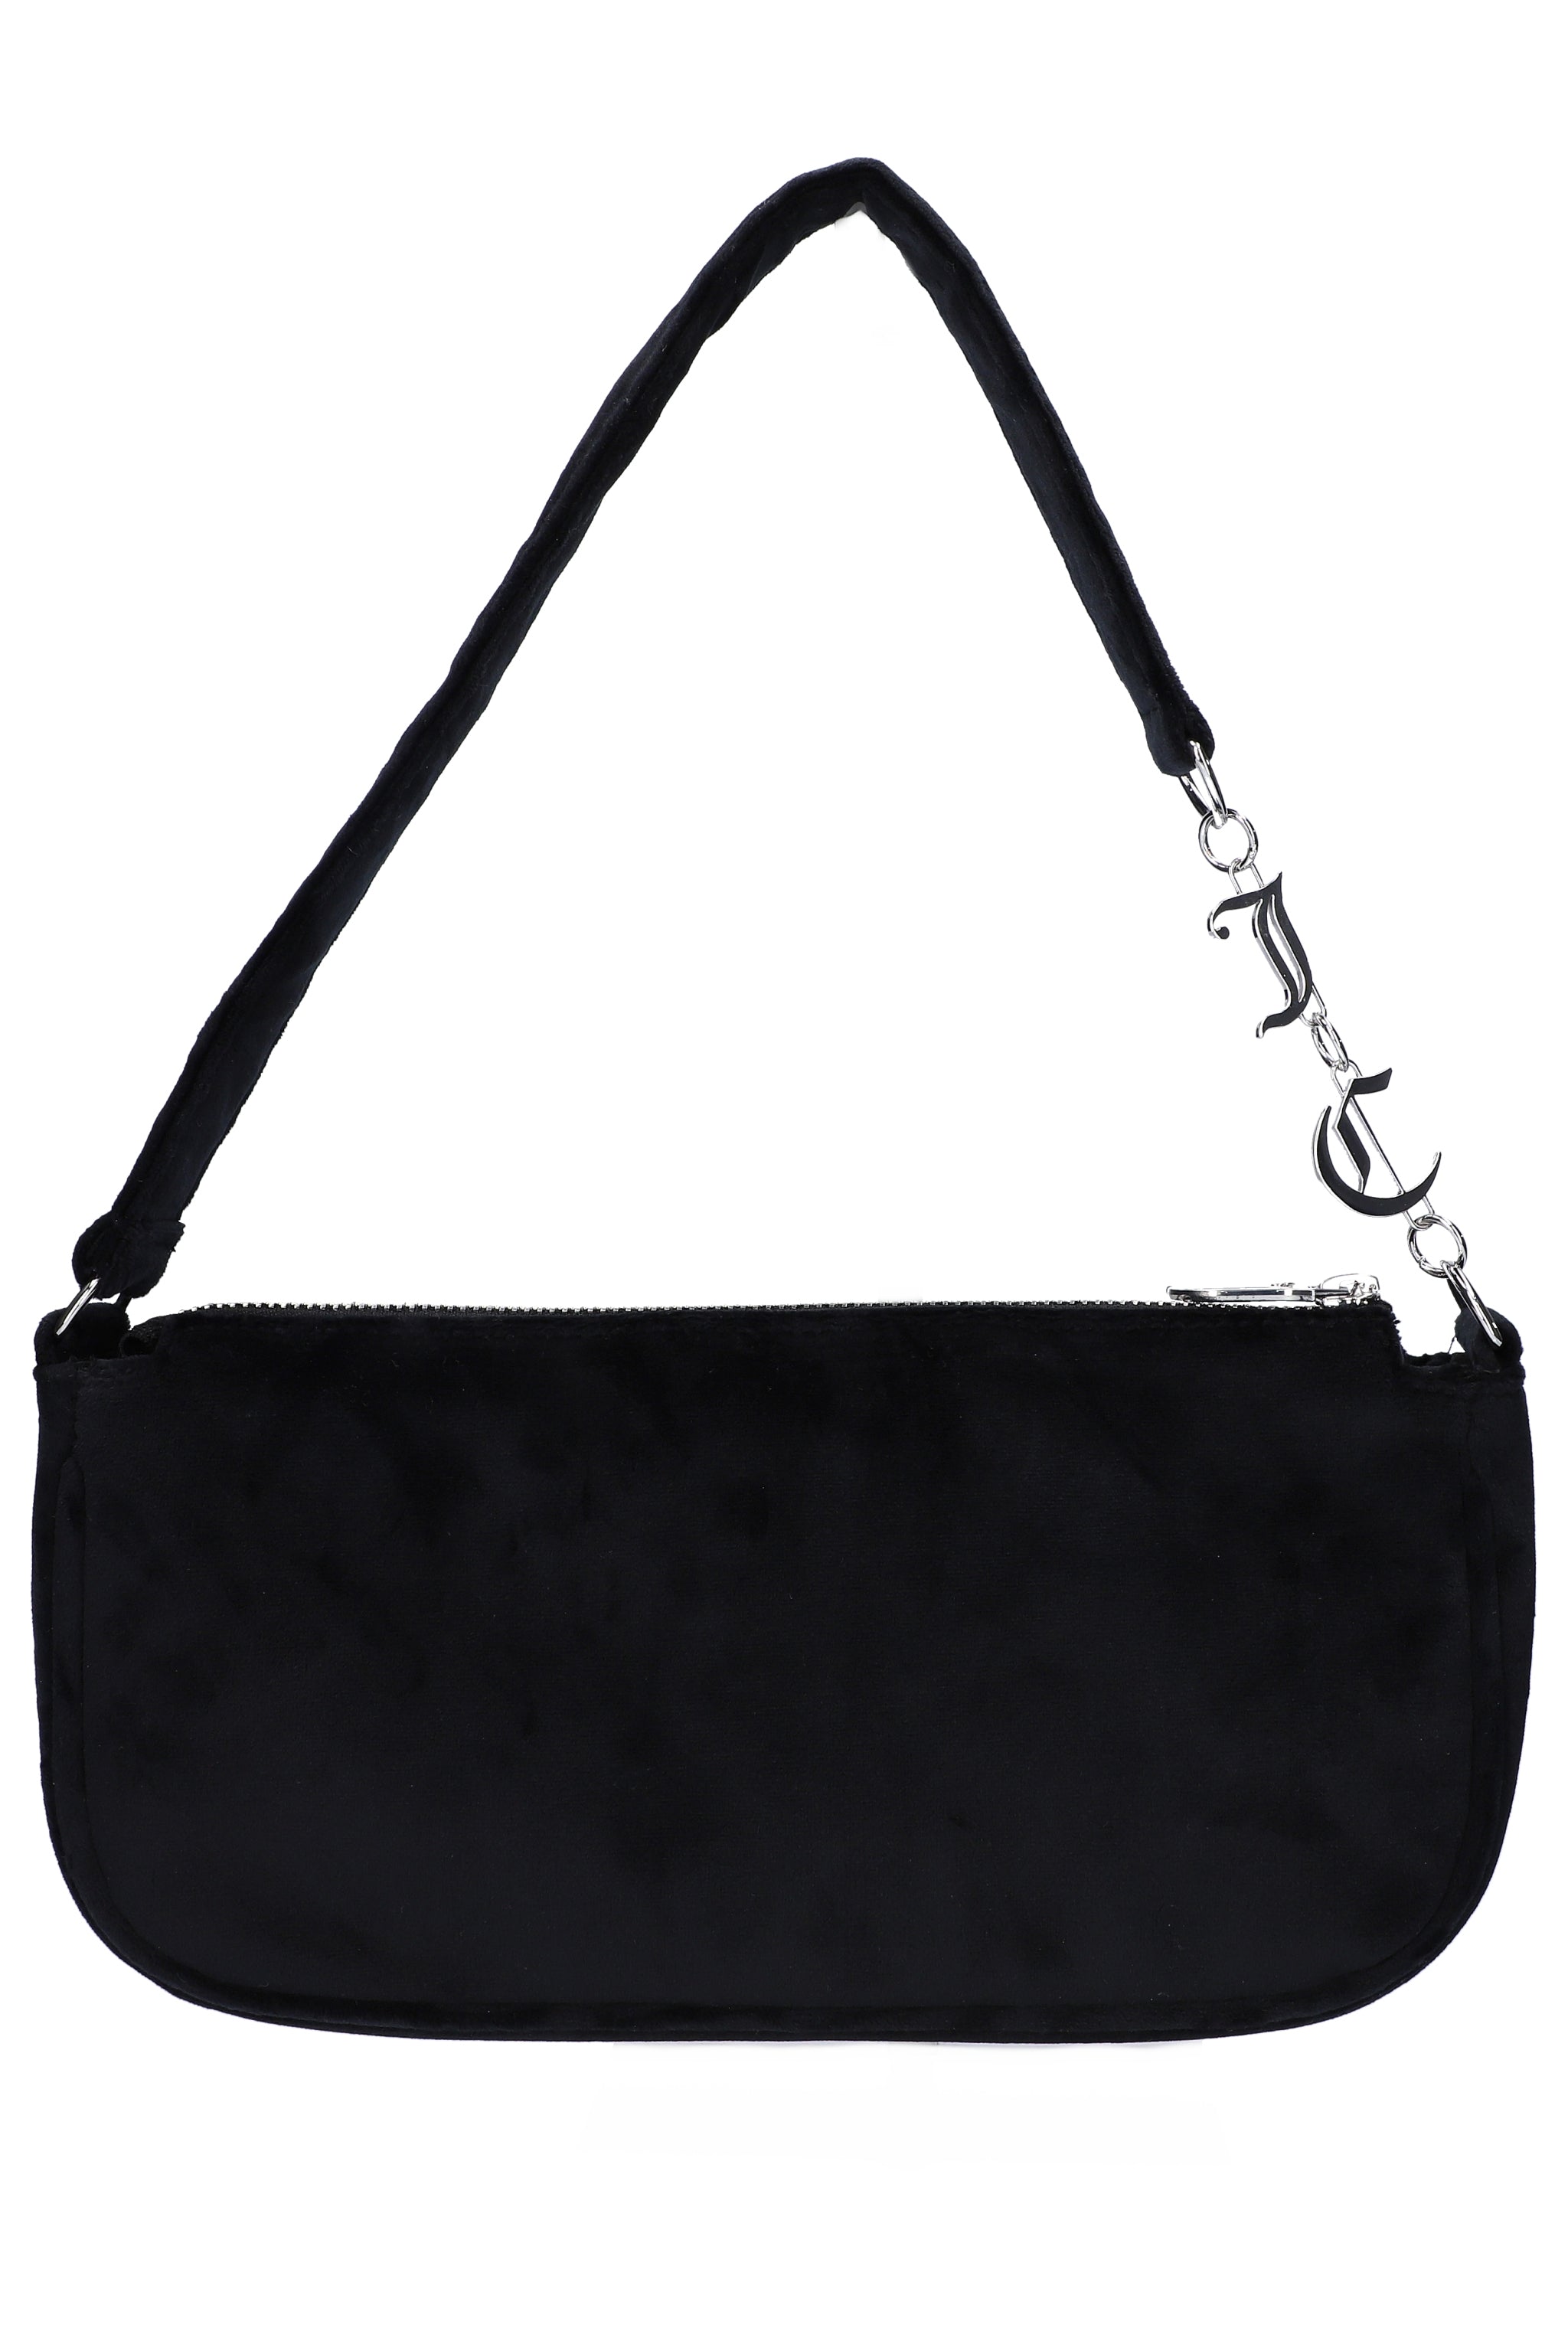 Juicy Couture black large daydreamer velour shoulder bag. Super cute I love  the gold tag charms. www.myinstylebouti… | Bags, Juicy couture bags, Juicy  couture purse